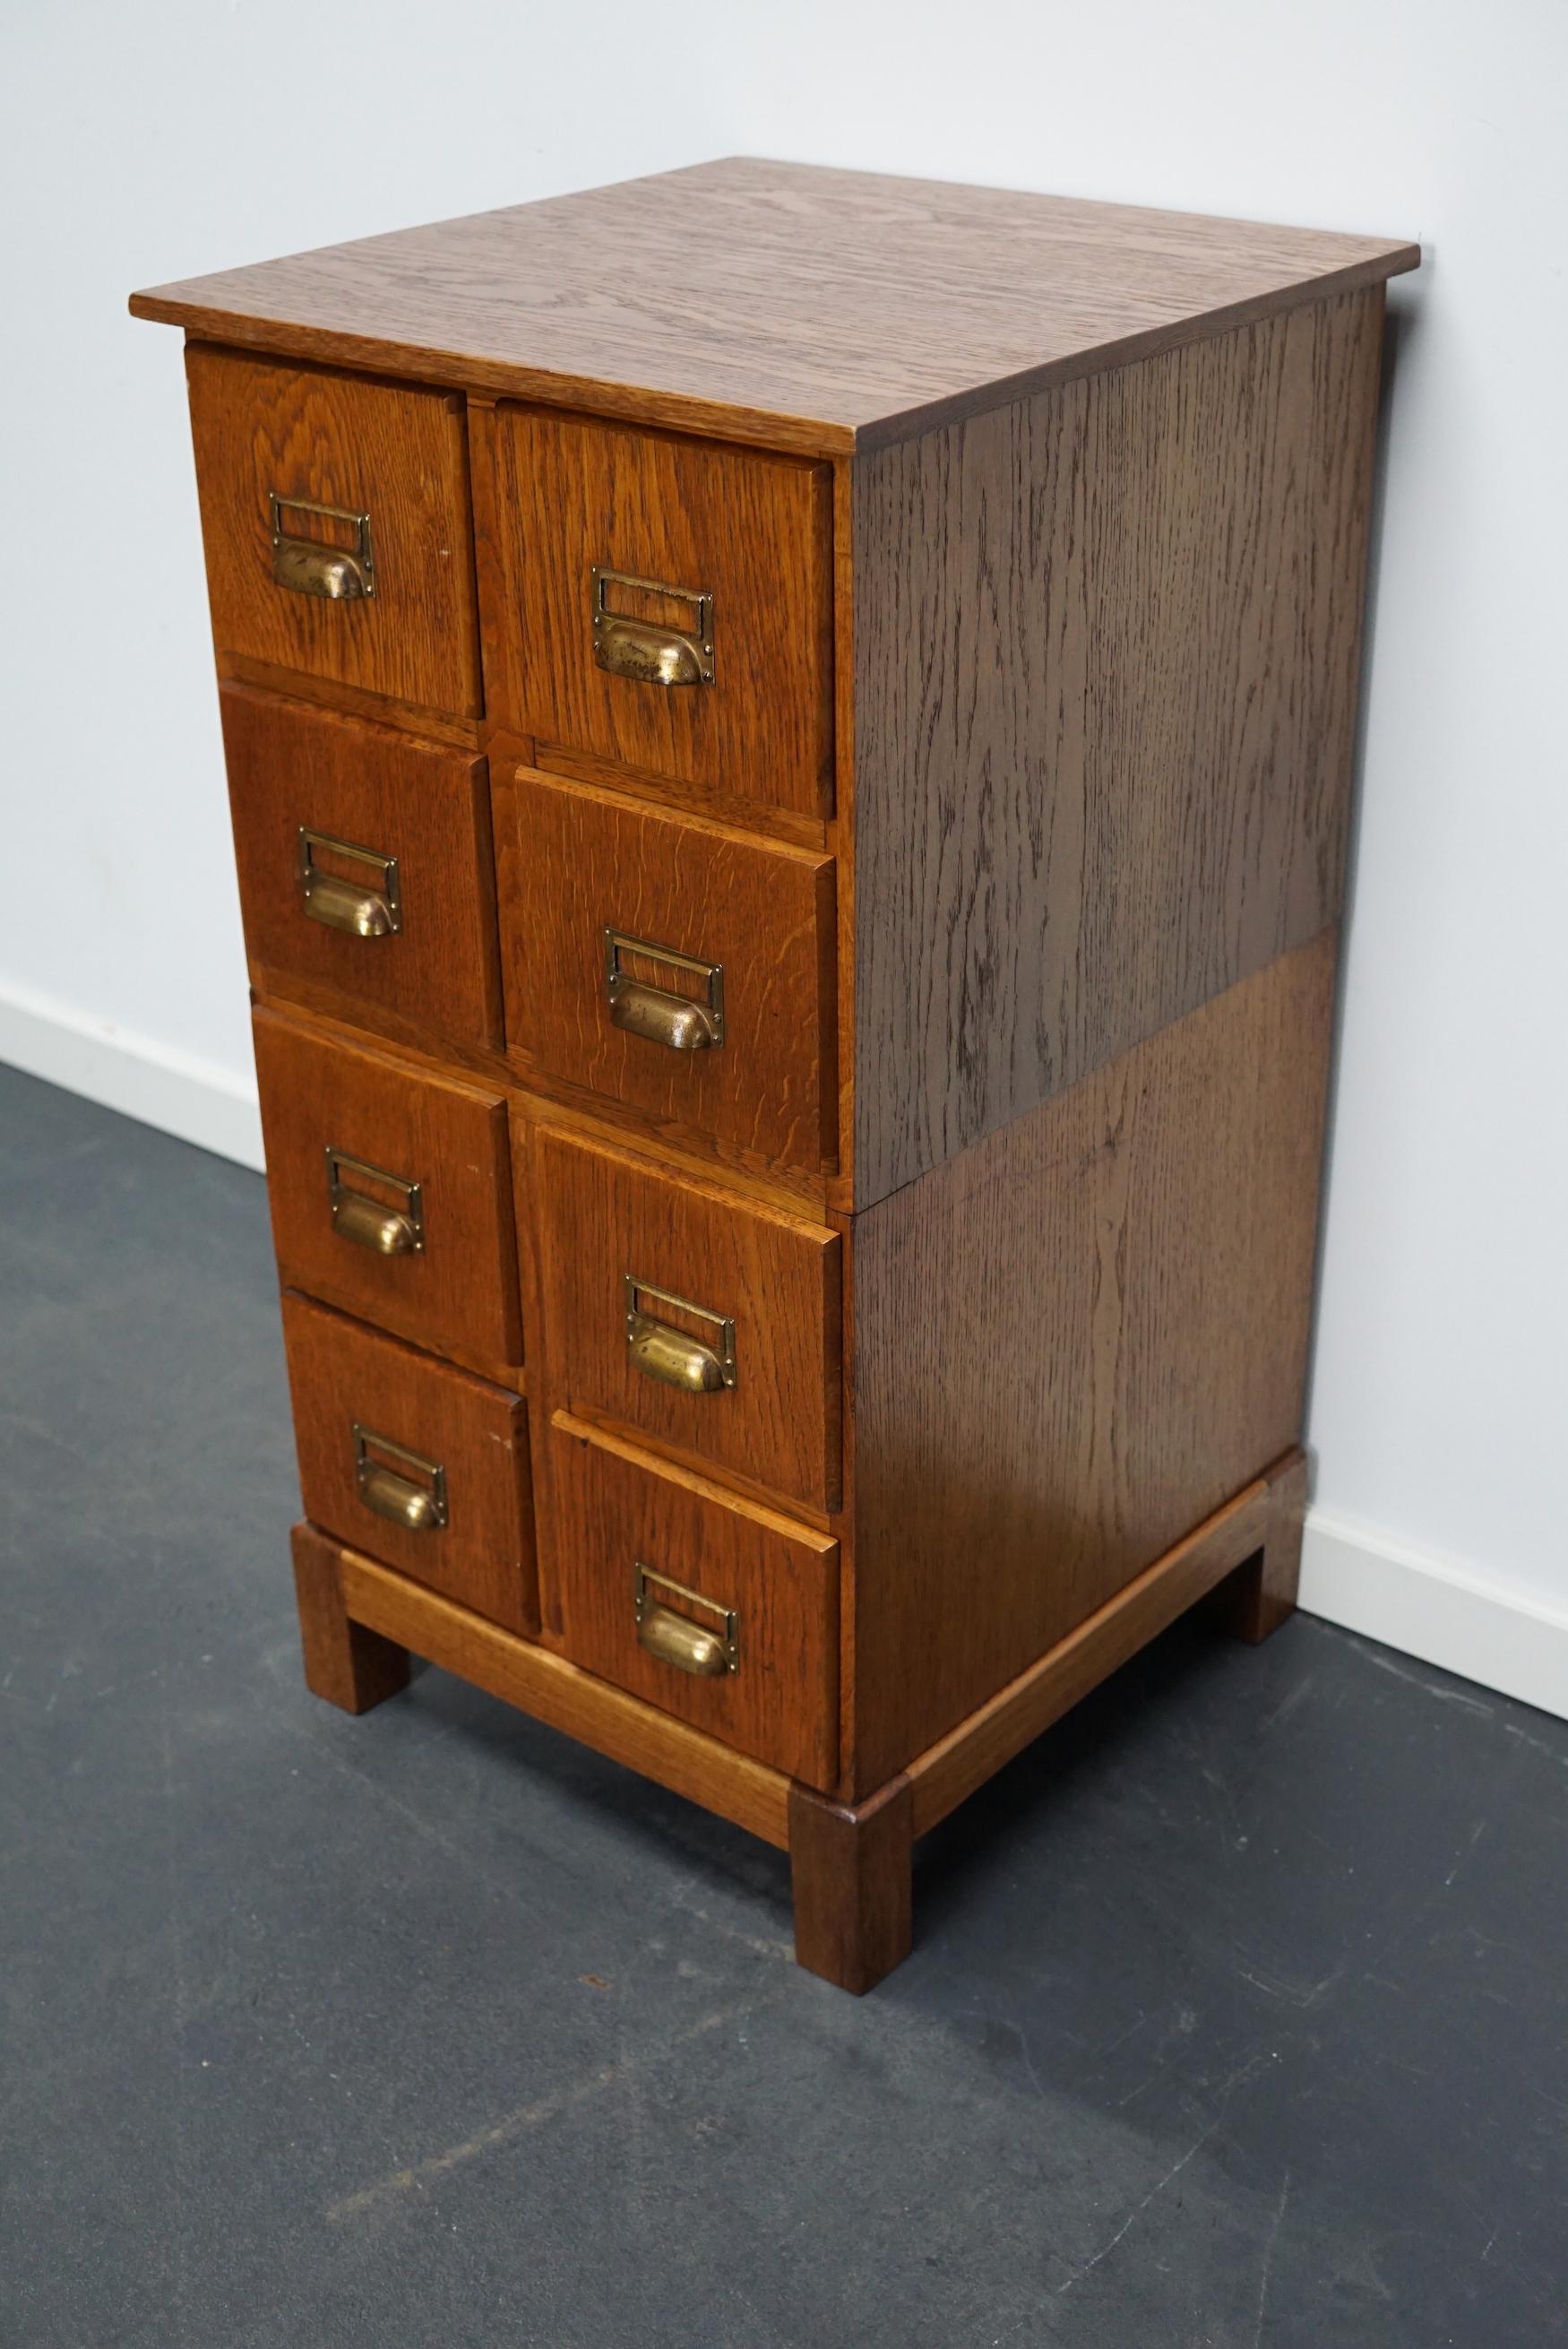 This apothecary cabinet was designed and made circa 1940s in Germany. It features 8 drawers with nice brass handles. The interior dimensions of the drawers are: D W H 34 x 15 x 5 / 12 cm.